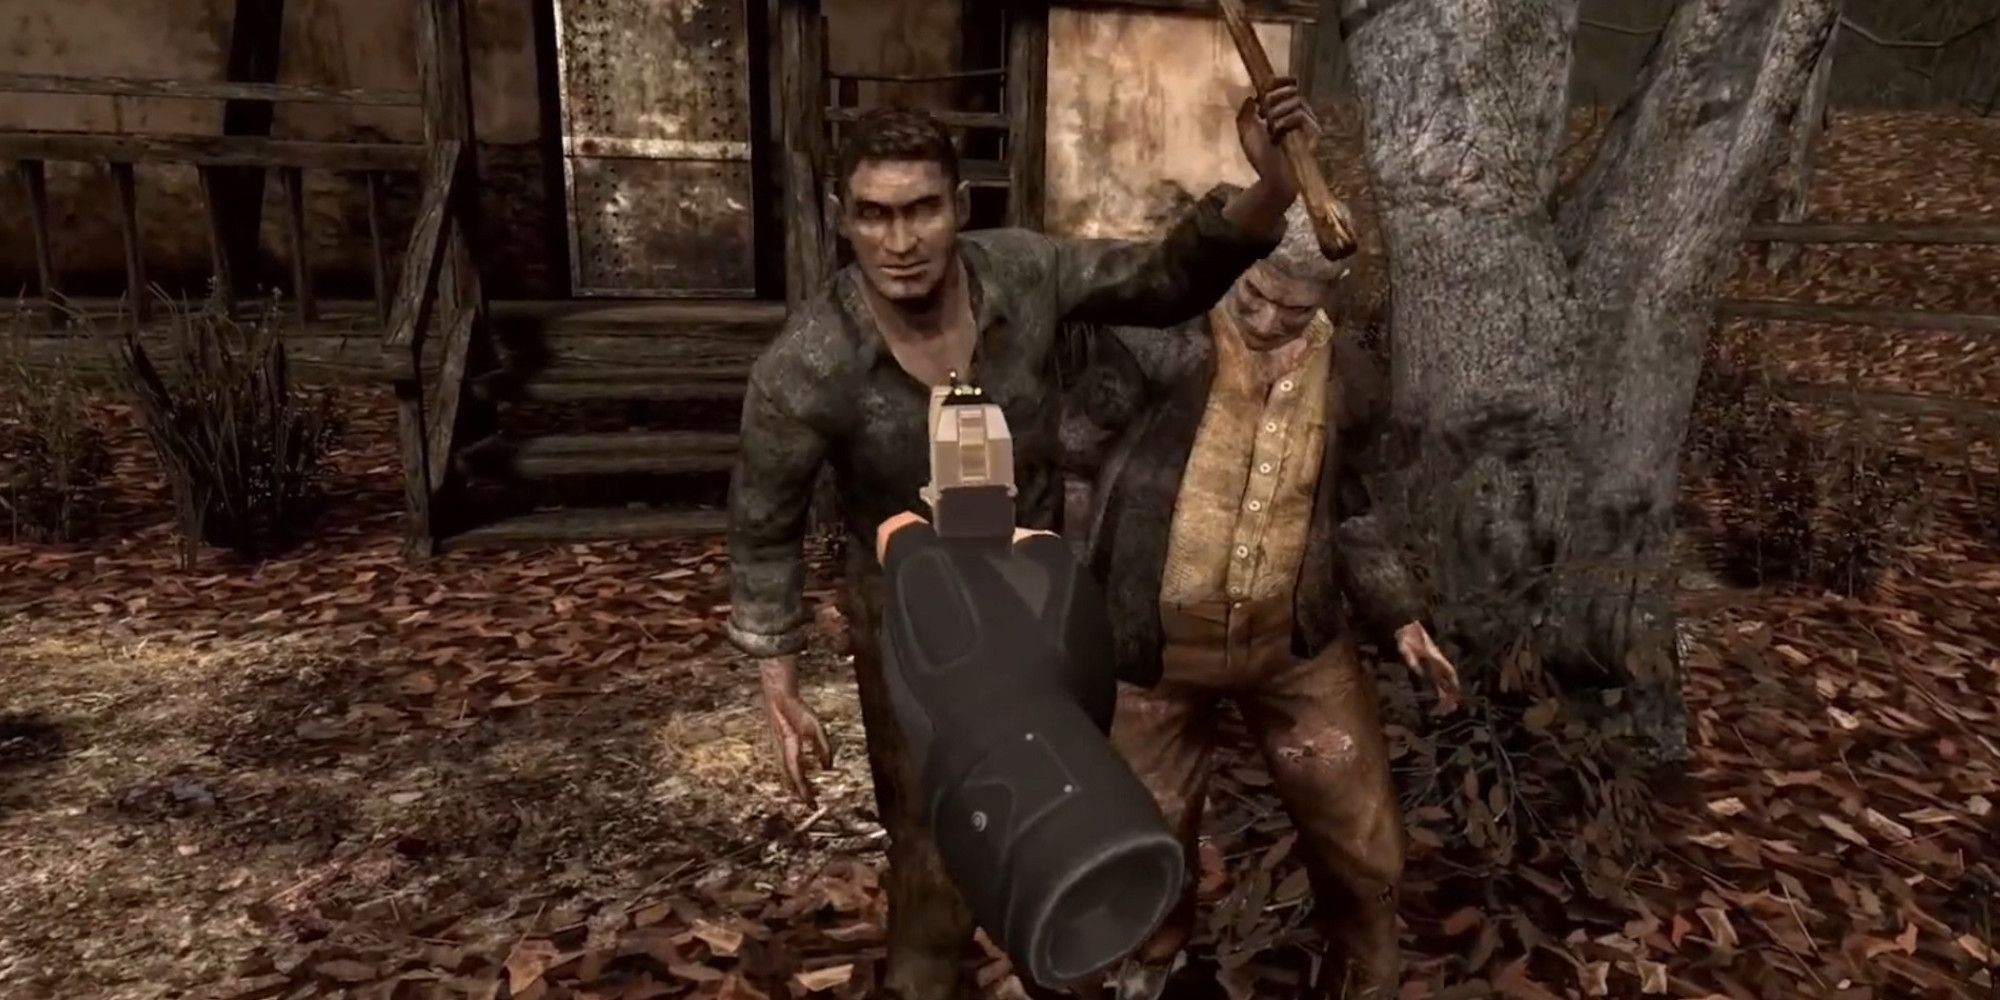 Resident evil 4 vr shooting a zombie with a pistol as it charges with an arm raised